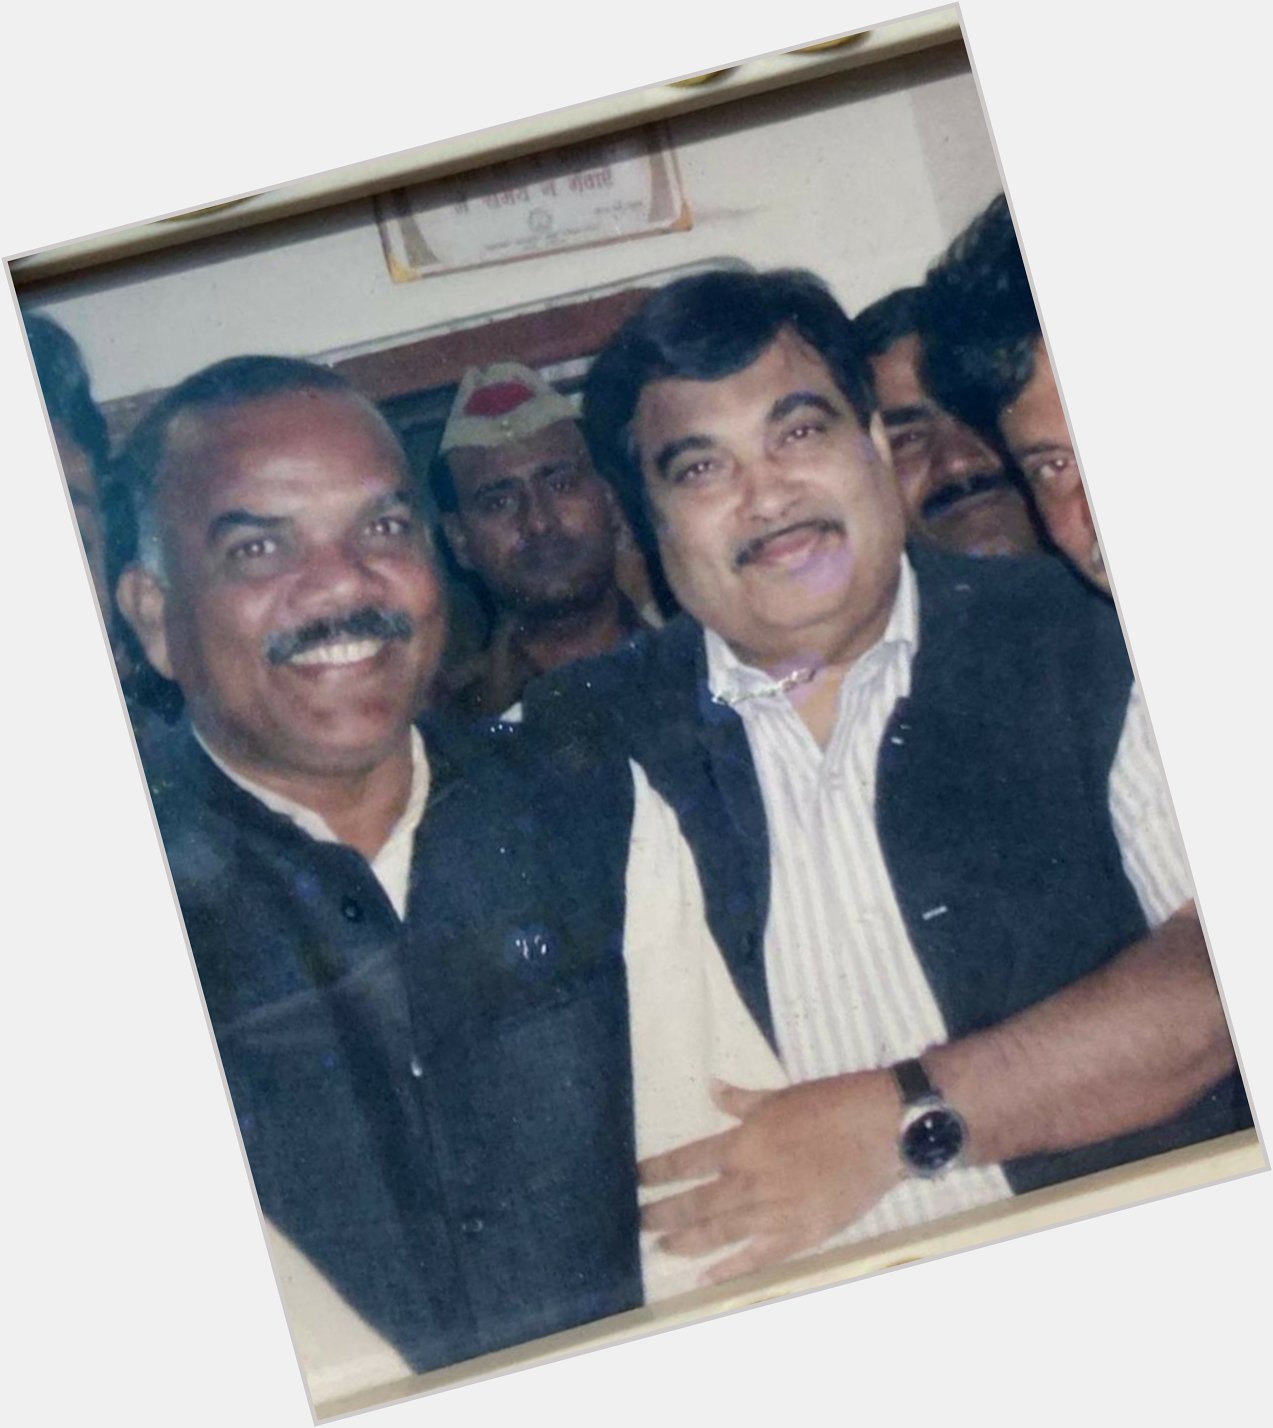 Happy Birthday jii our cabinet minister..
From my father ..Anoop Gupta 